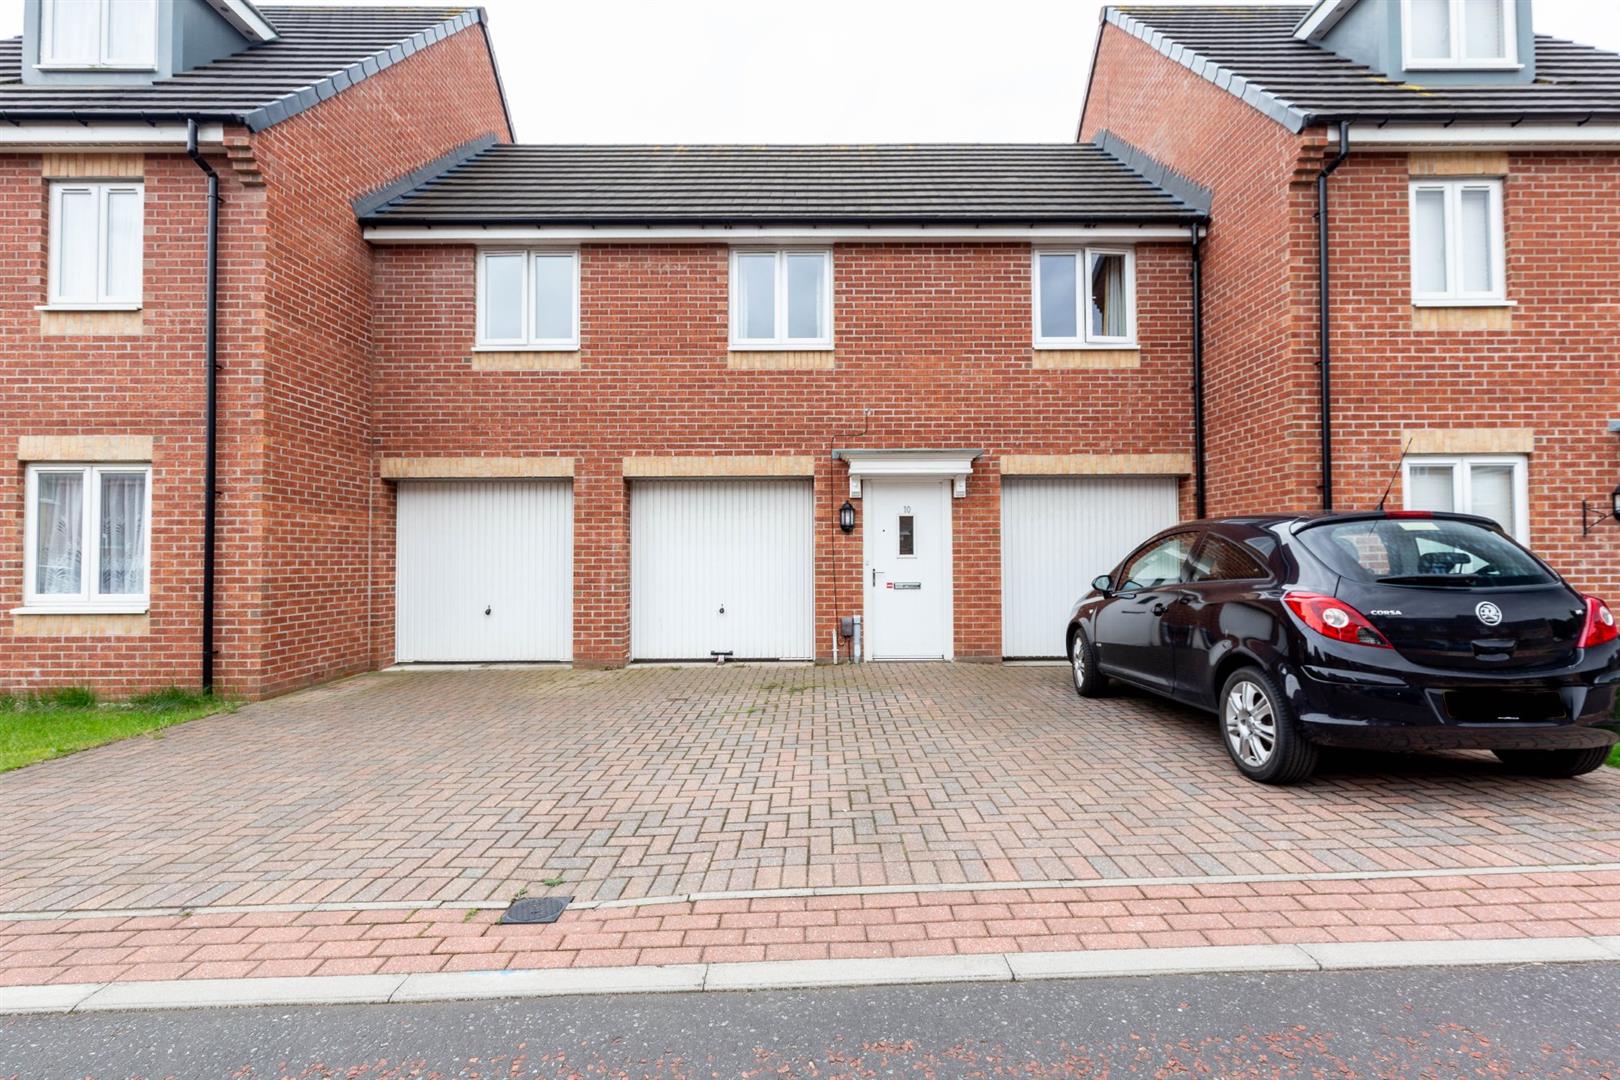 2 bed apartment for sale in Williston Close, Westerhope - Property Image 1